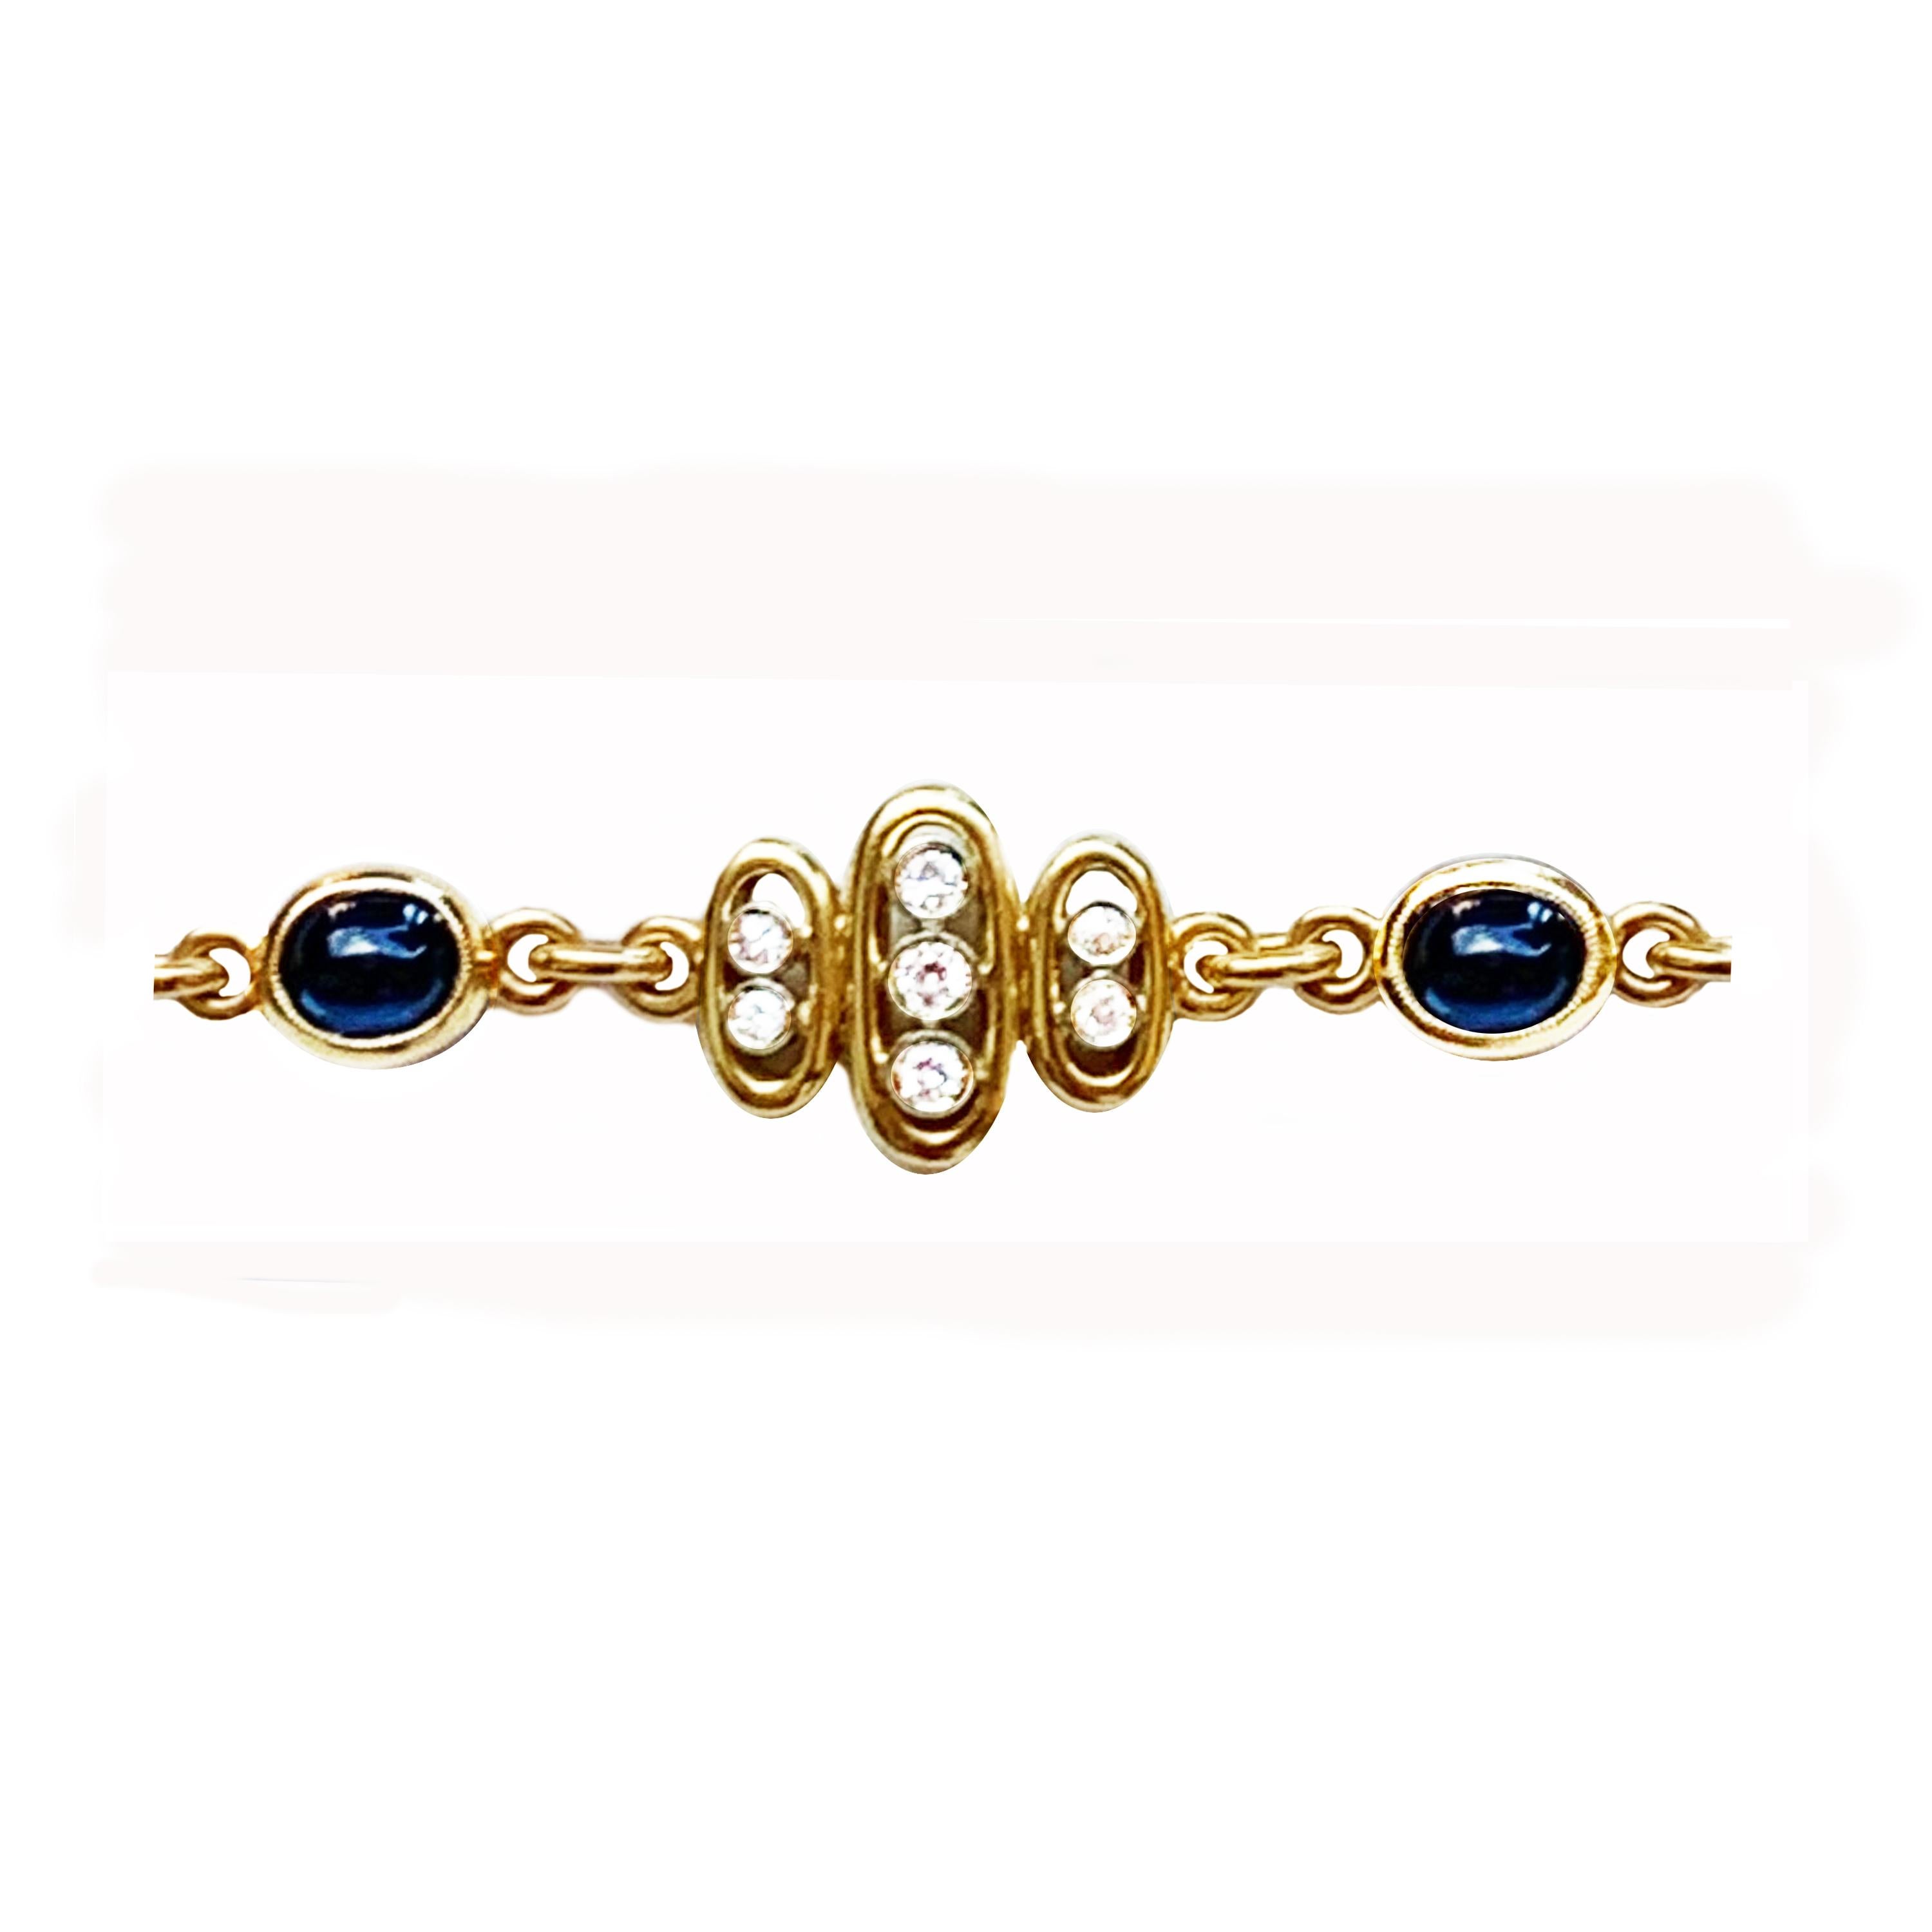 Refined white and yellow 18 Kt gold vintage sapphire and diamond bracelet. The bracelet is set with 5 natural beautiful cabochon sapphire 5 x 7 mm and 35 diamonds. It is completely handmade by skilled Italian artisans. 